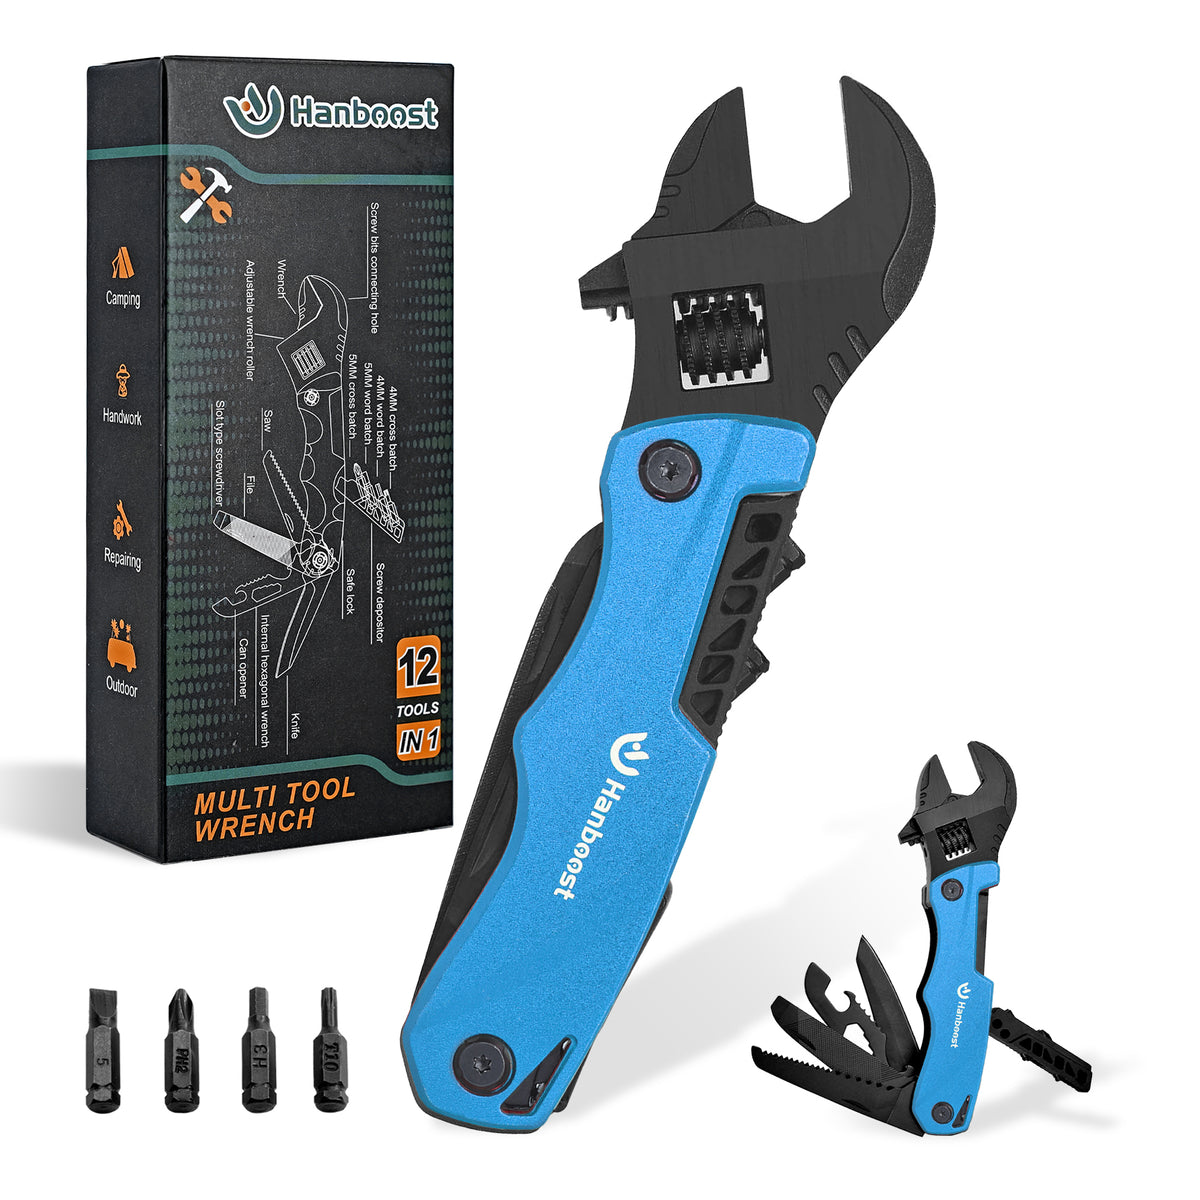 Hanboost M1 Multitool Wrench 12 In 1 With Flathead Phillips Screwdriver Wood Cutting Saw Bottle Can Opener for Camping (Blue）